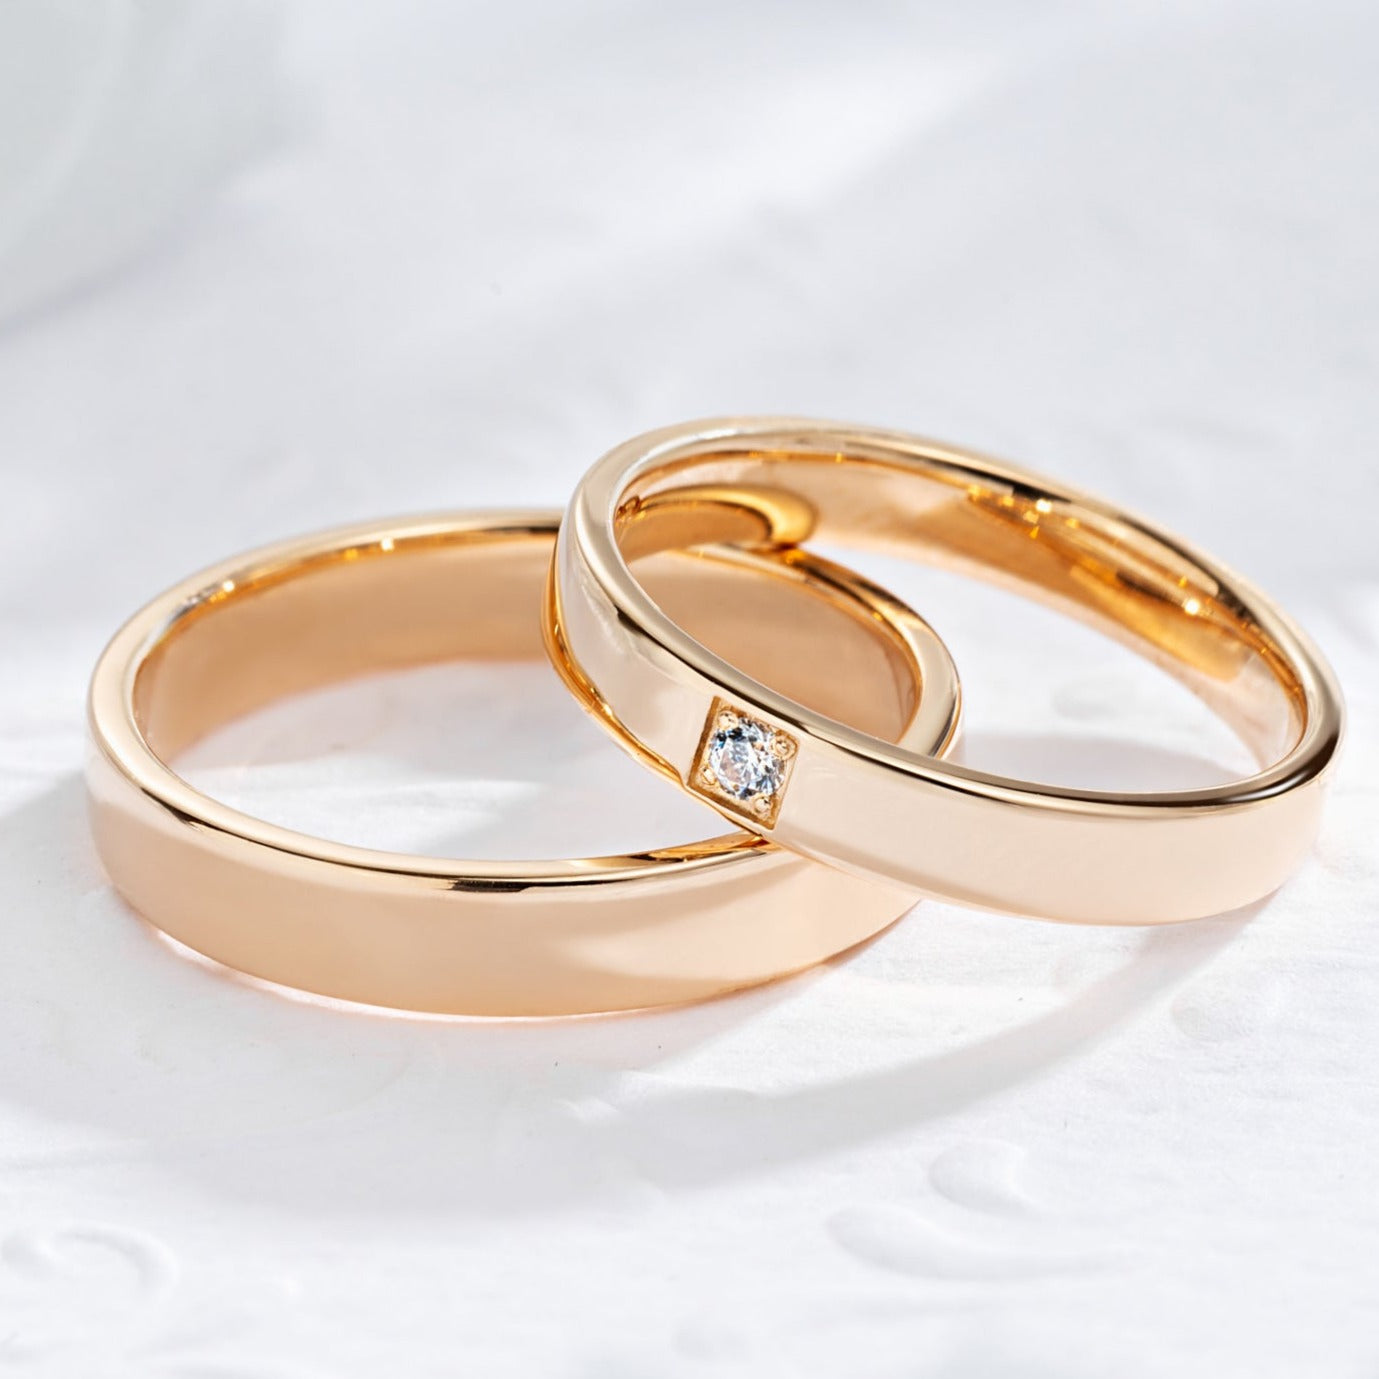 plain wedding rings. Solid gold wedding bands with diamond. Rose gold wedding rings set. Couple rings. Matching wedding bands